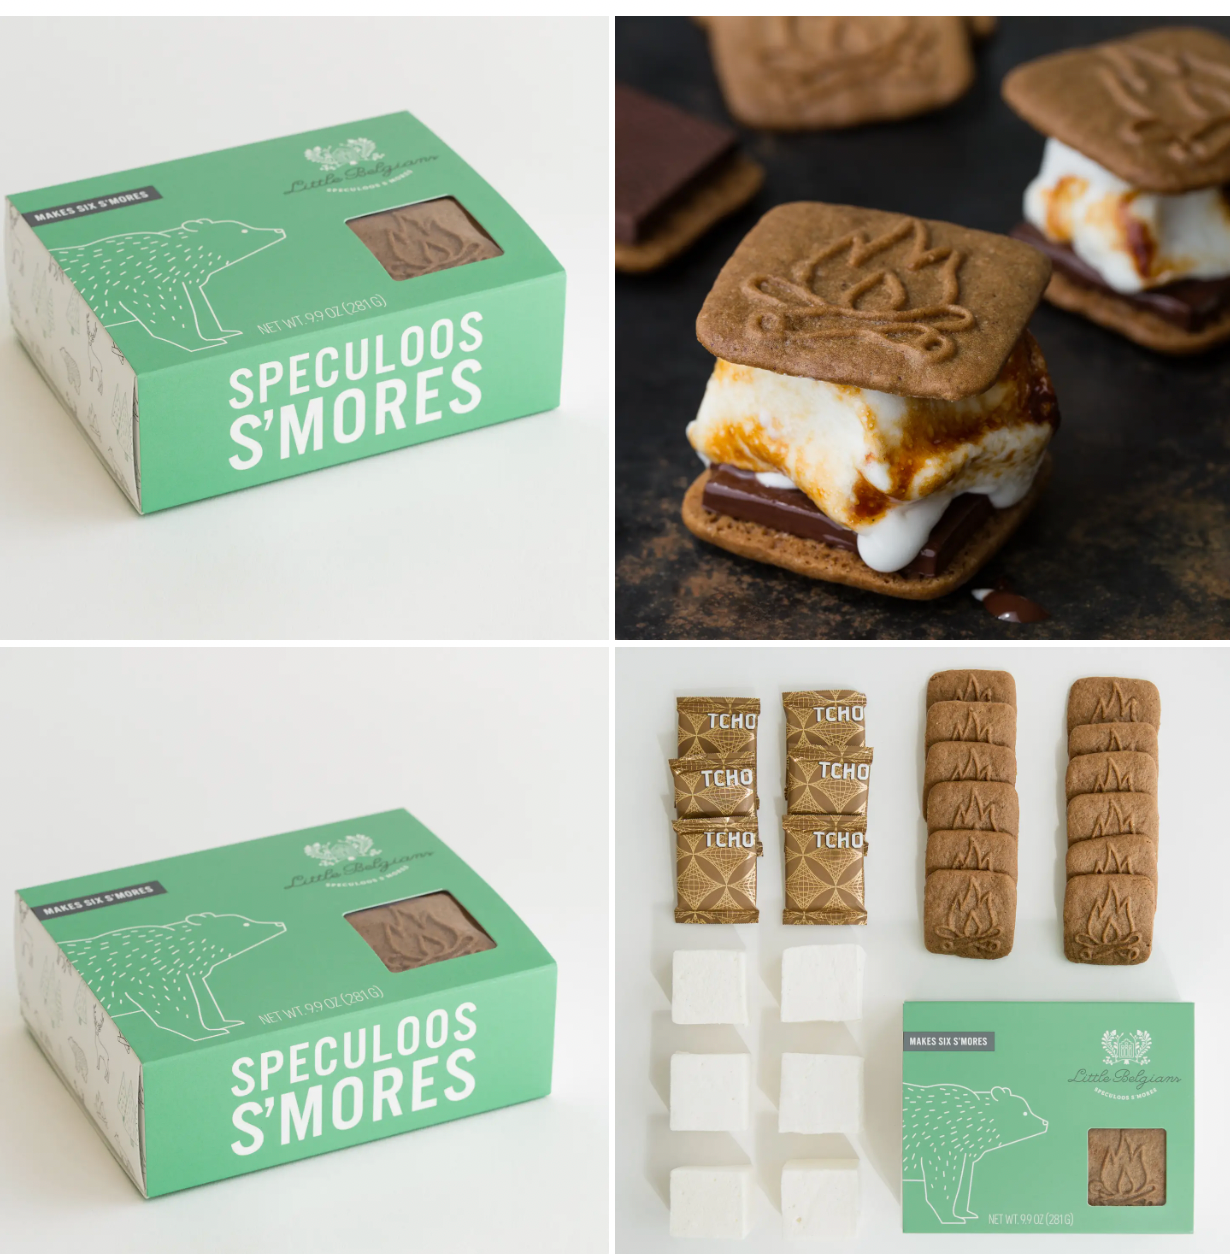 Speculoos S’Mores